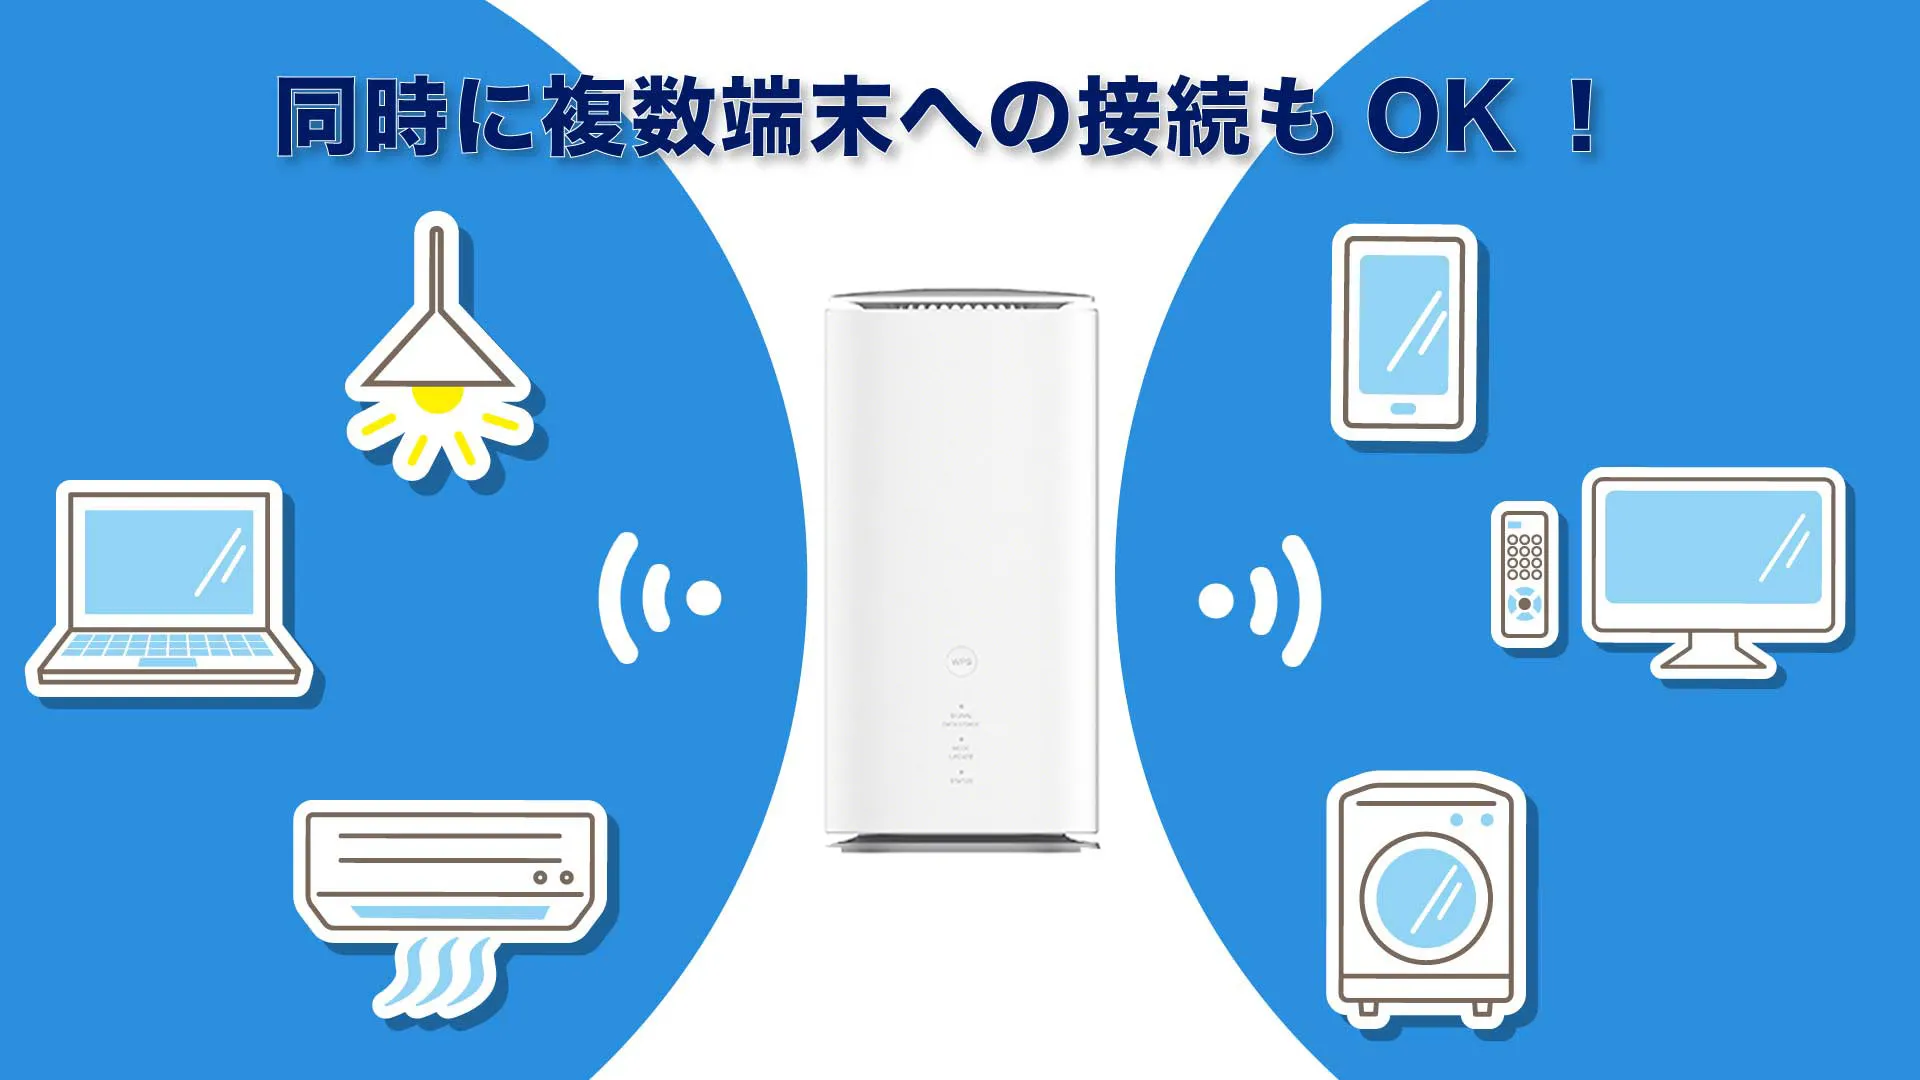 Speed Wi-Fi HOME 5G L13】コンセントに挿すだけのホームルーター 